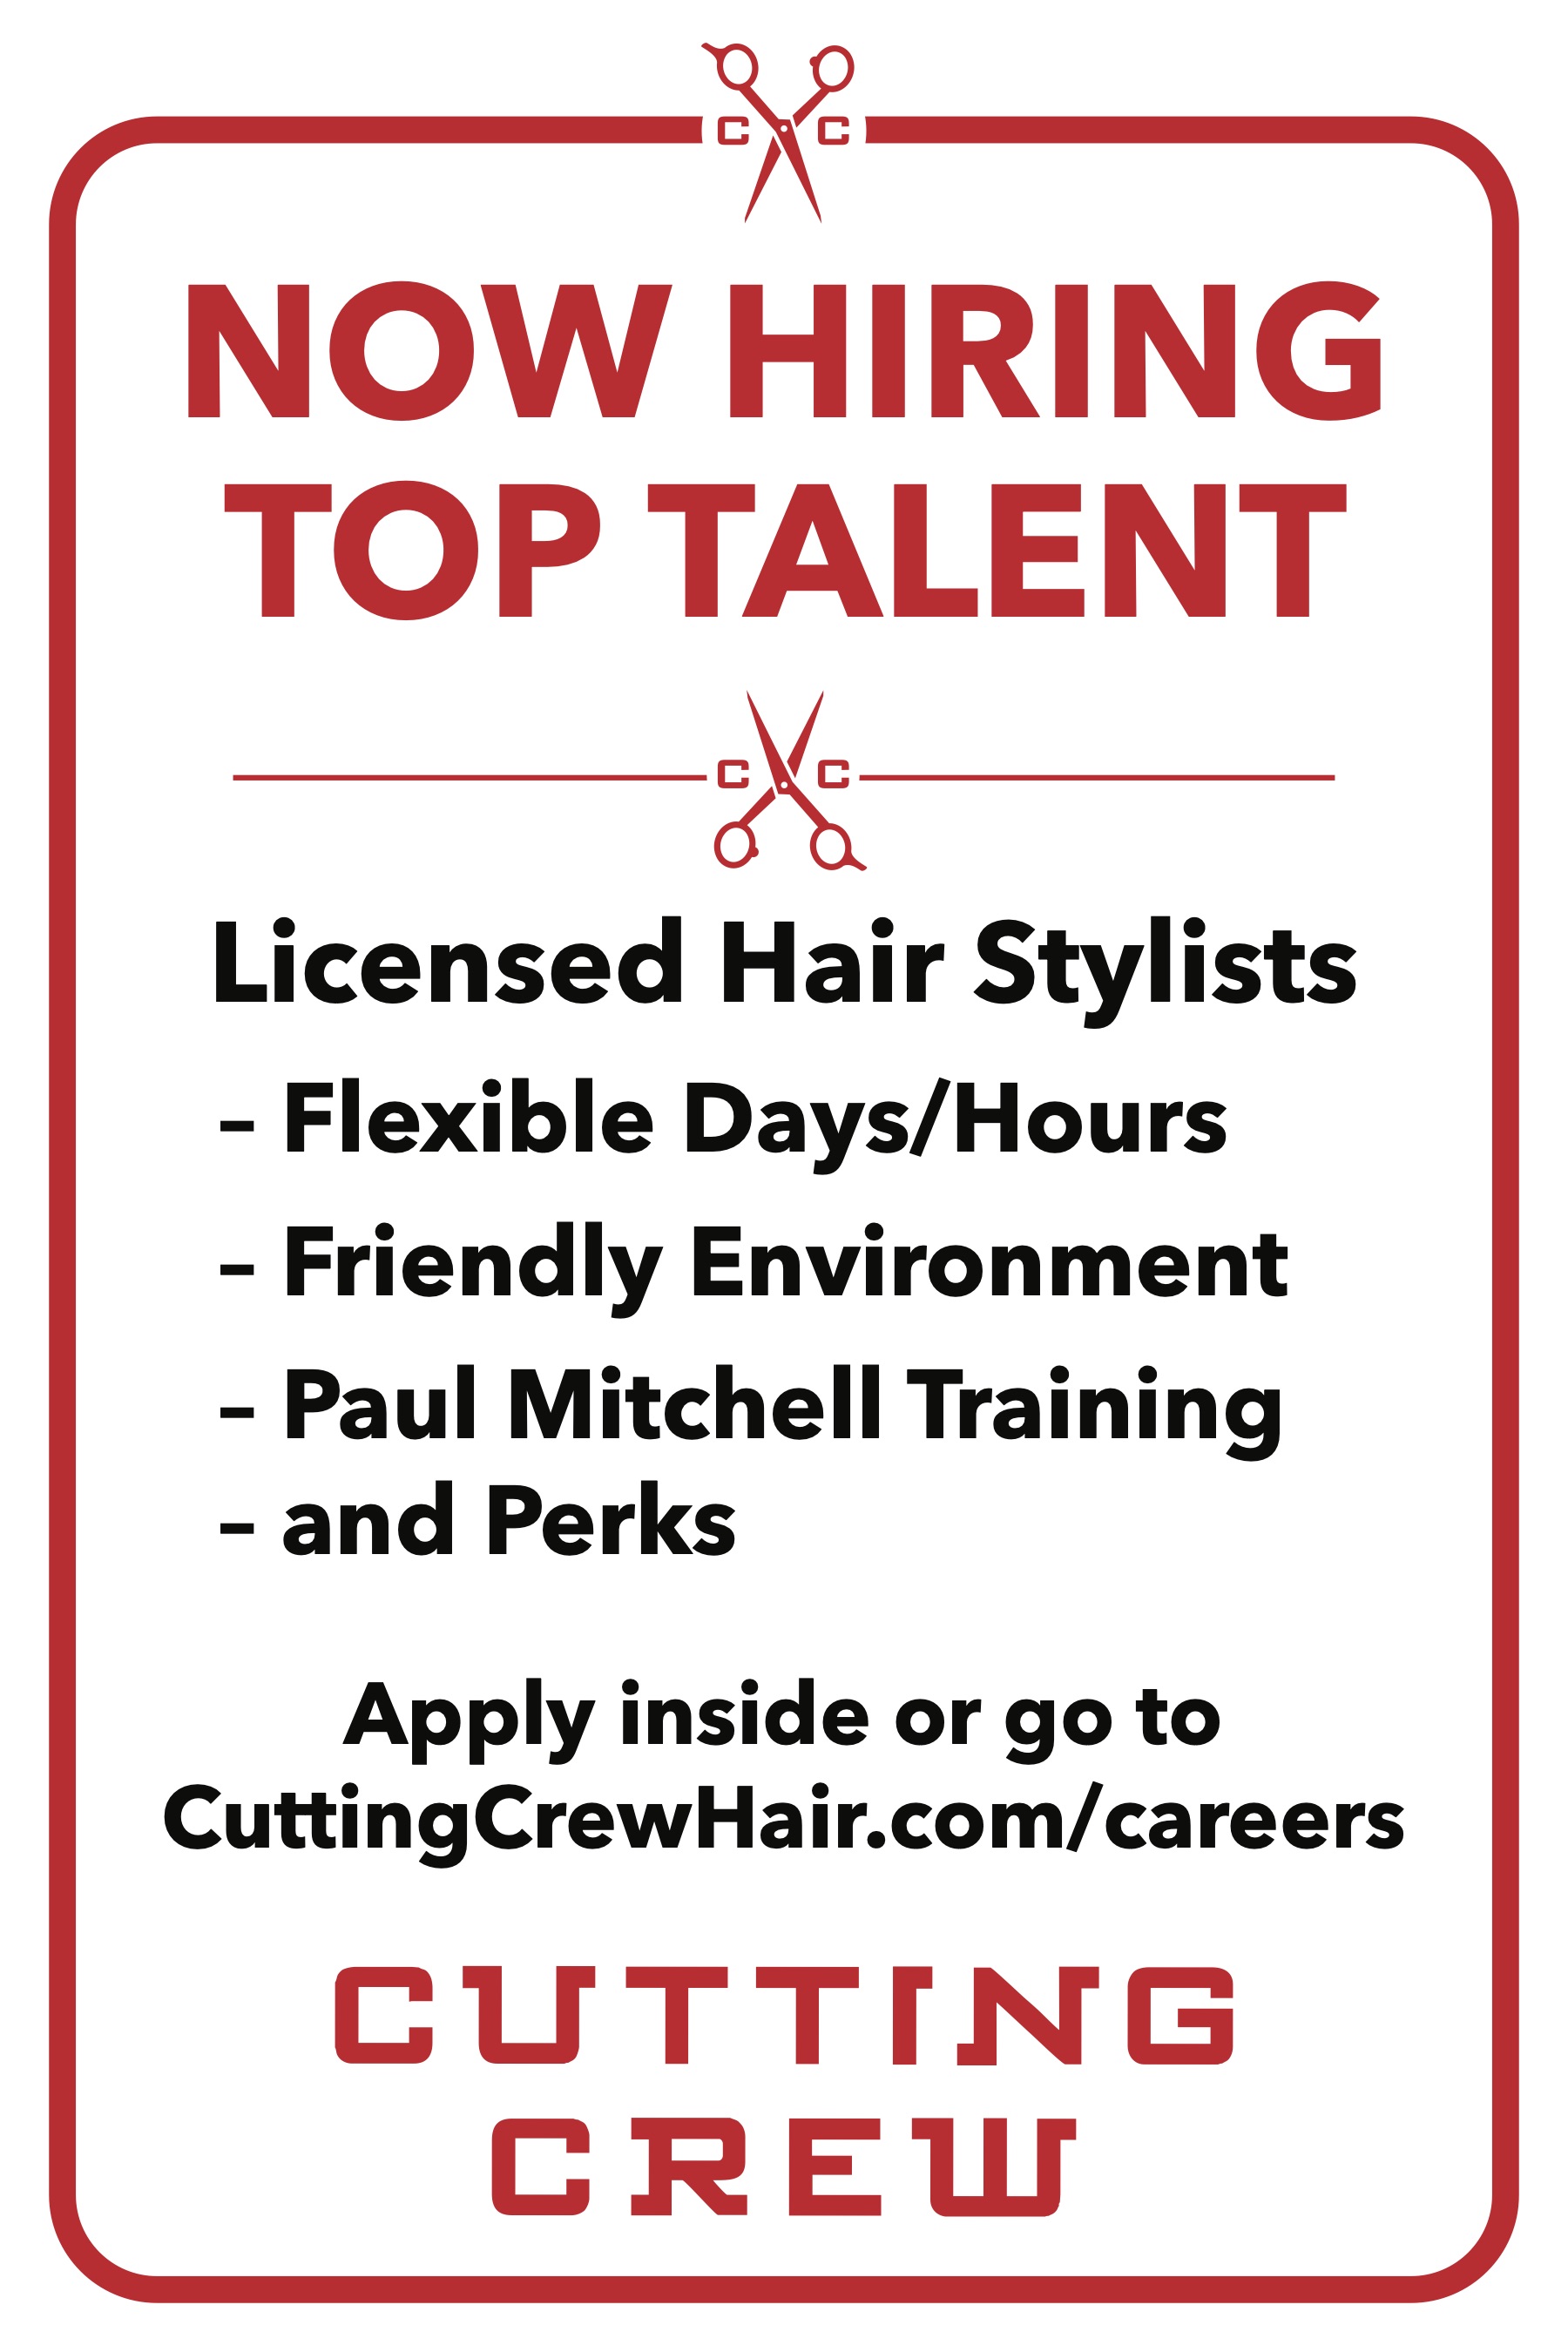 Jump start your career today with the Cutting Crew Hair Salon team and our current employment opportunities in Hackettstown.